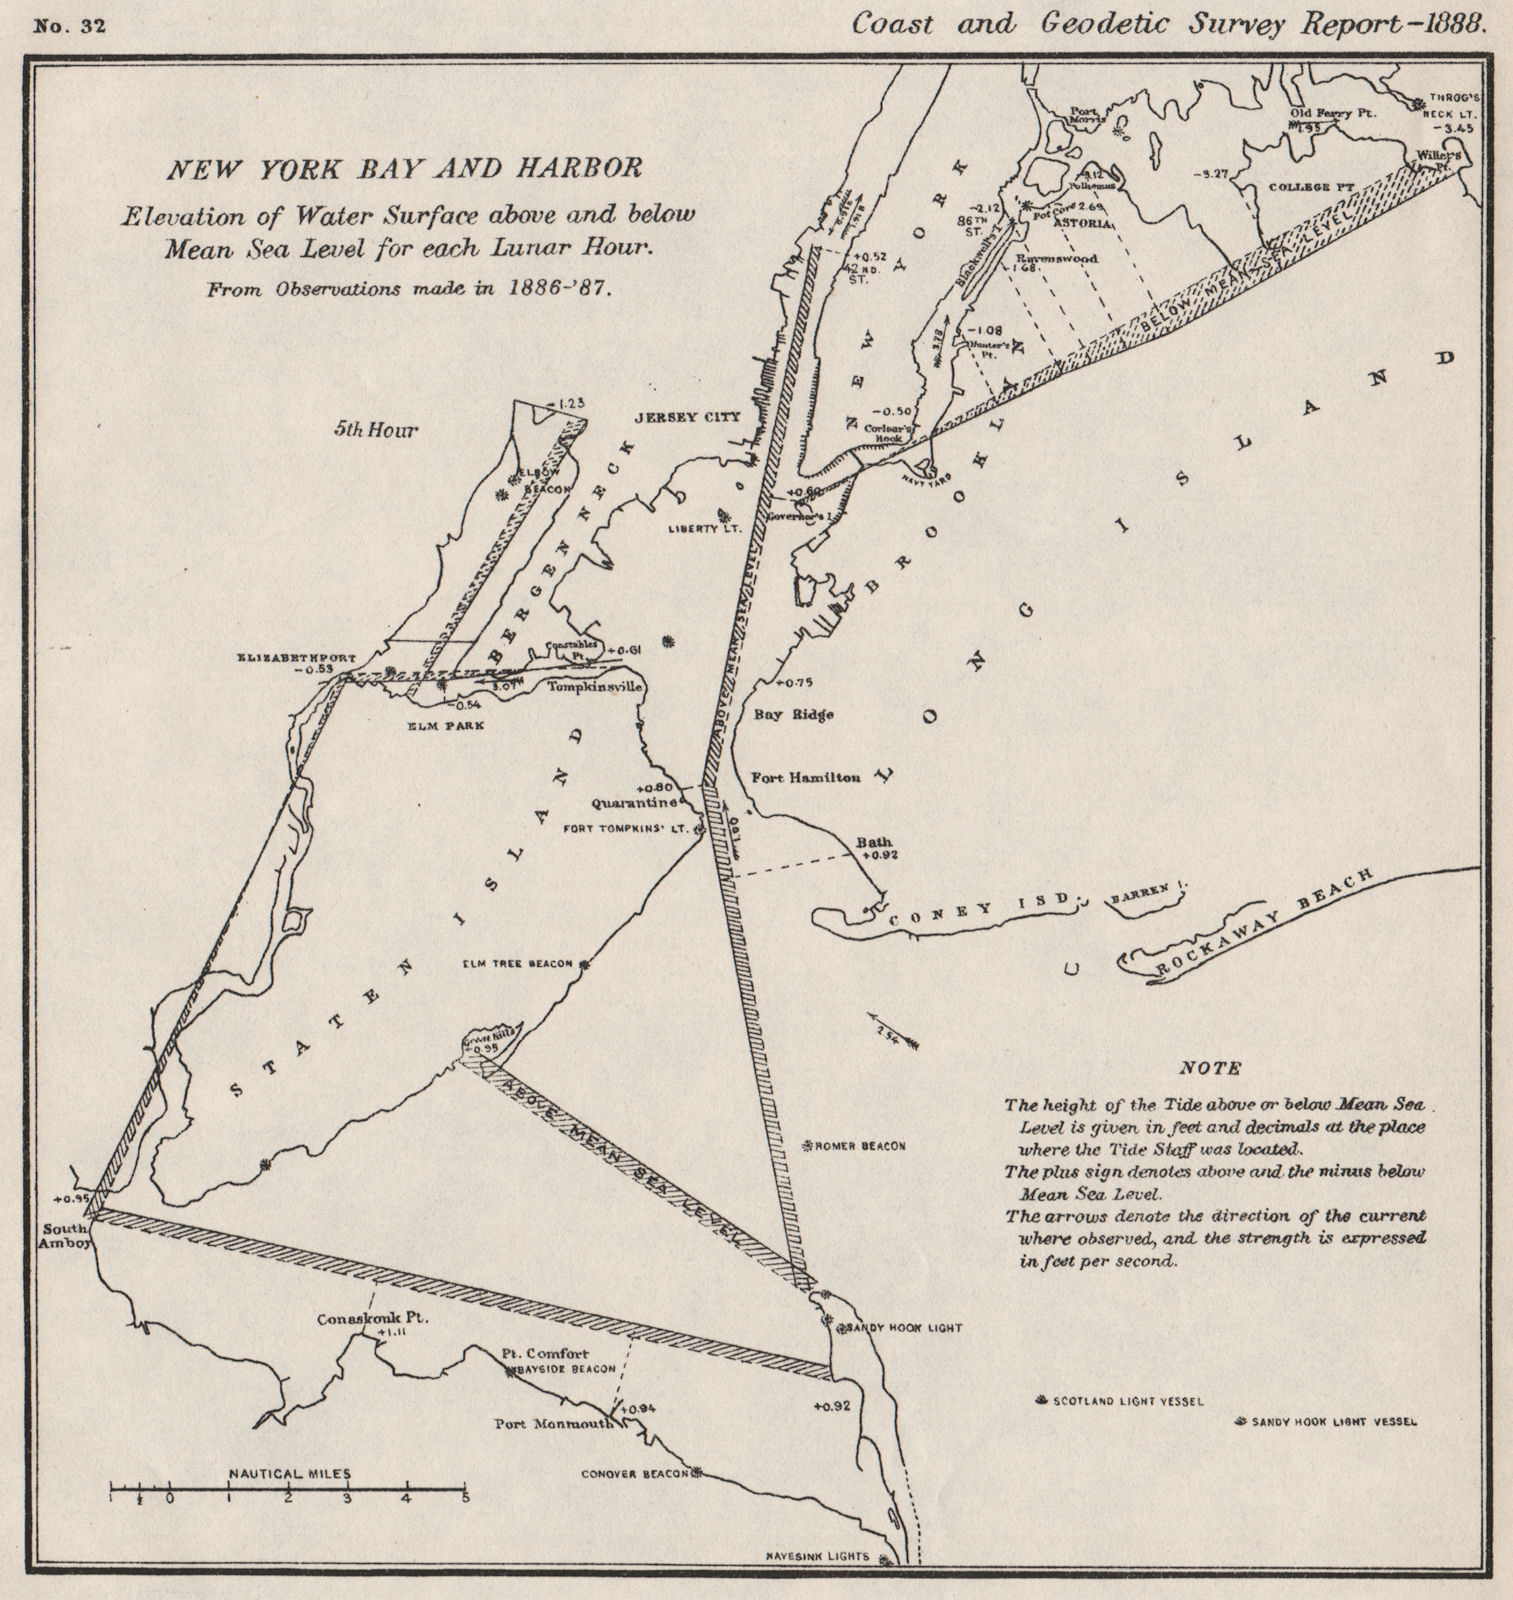 Associate Product NEW YORK BAY/HARBOR. Water level v mean sea level 5th Lunar Hour. USCGS 1889 map